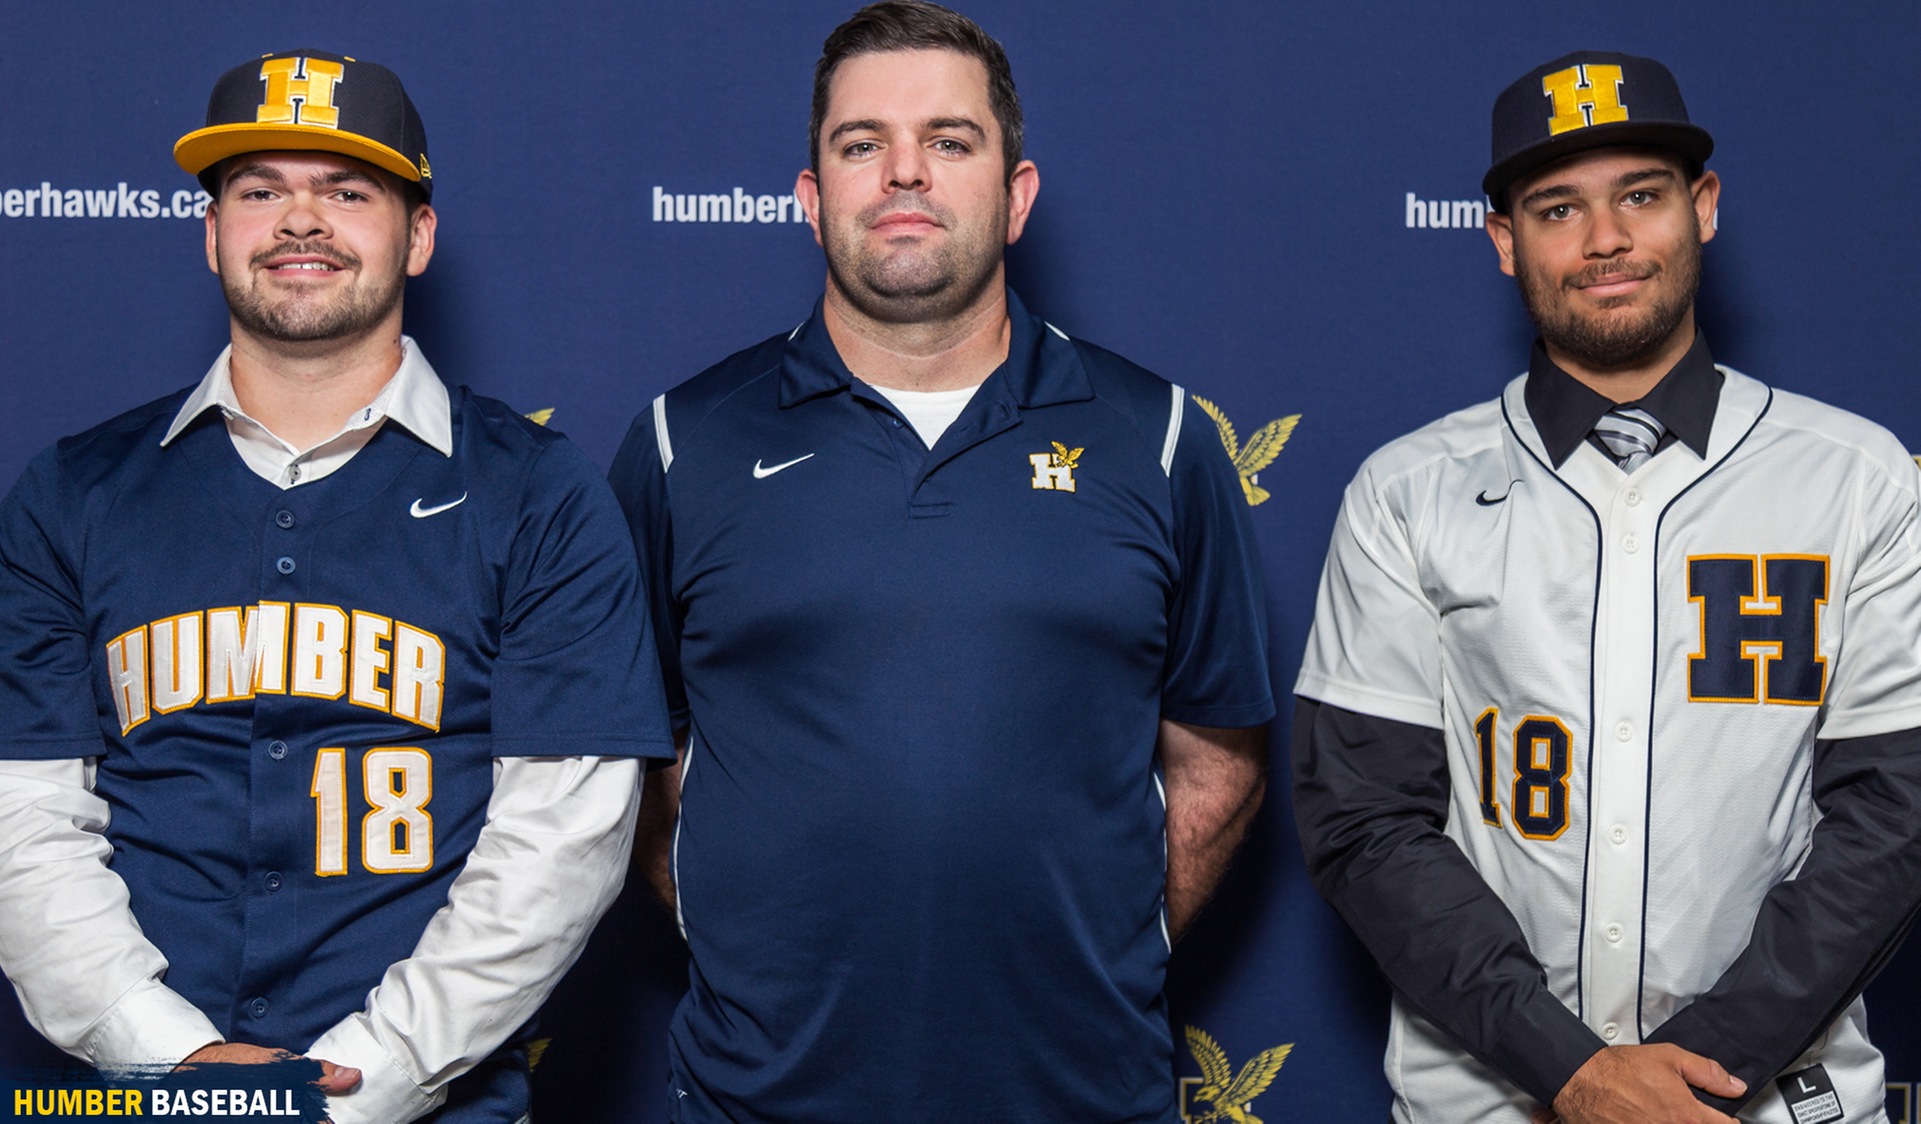 Humber Baseball Adds Two More Recruits to 2018 Signing Class